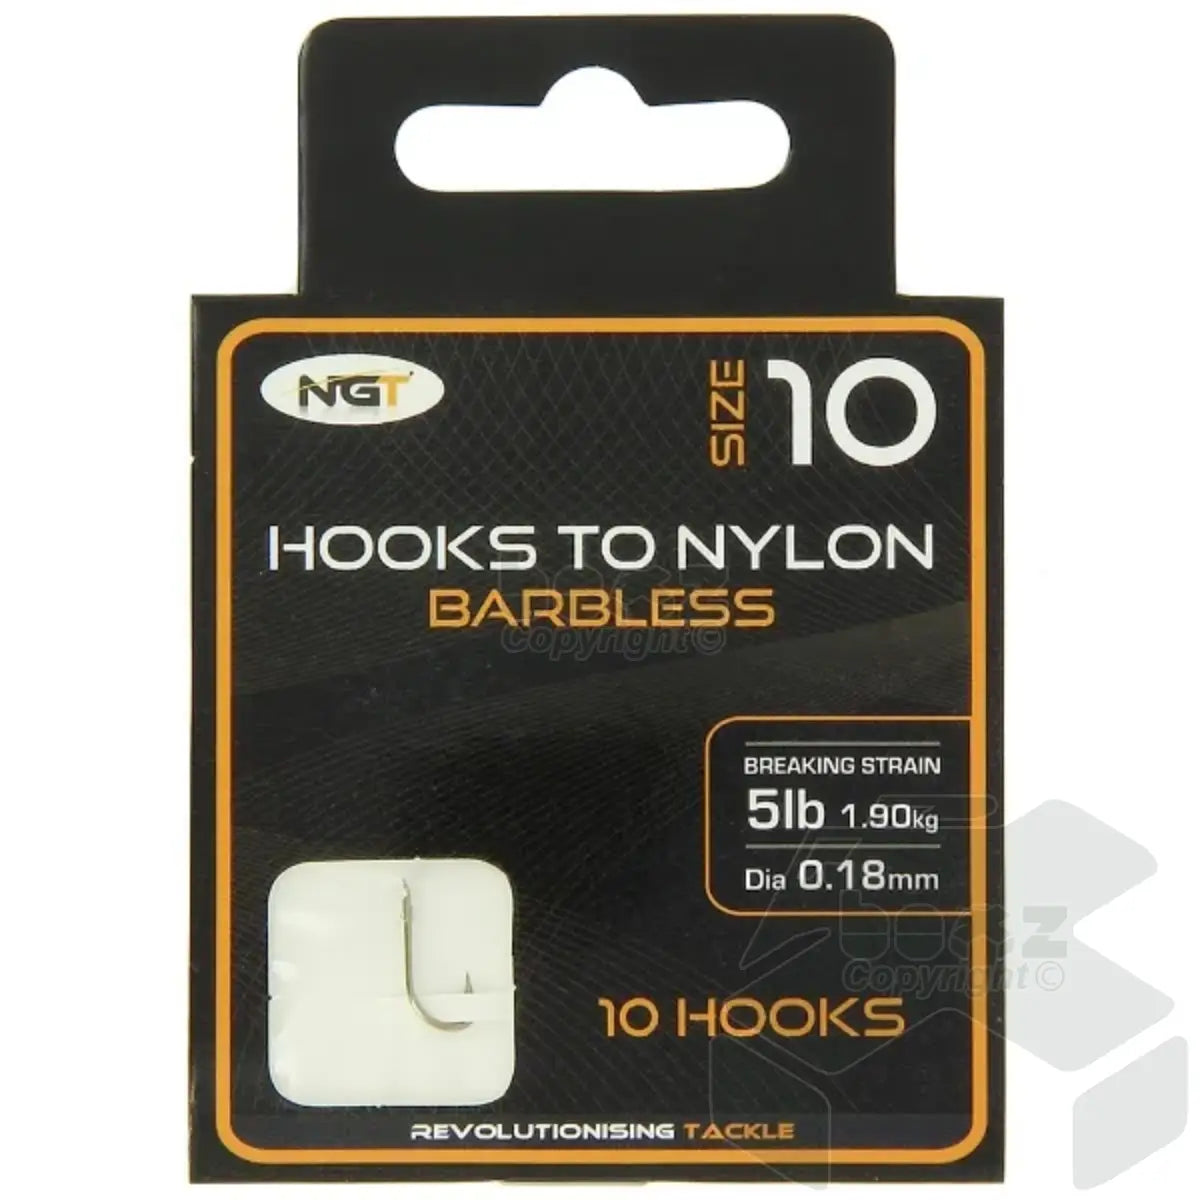 NGT 10 Barbless Hooks To Nylon - Size 10